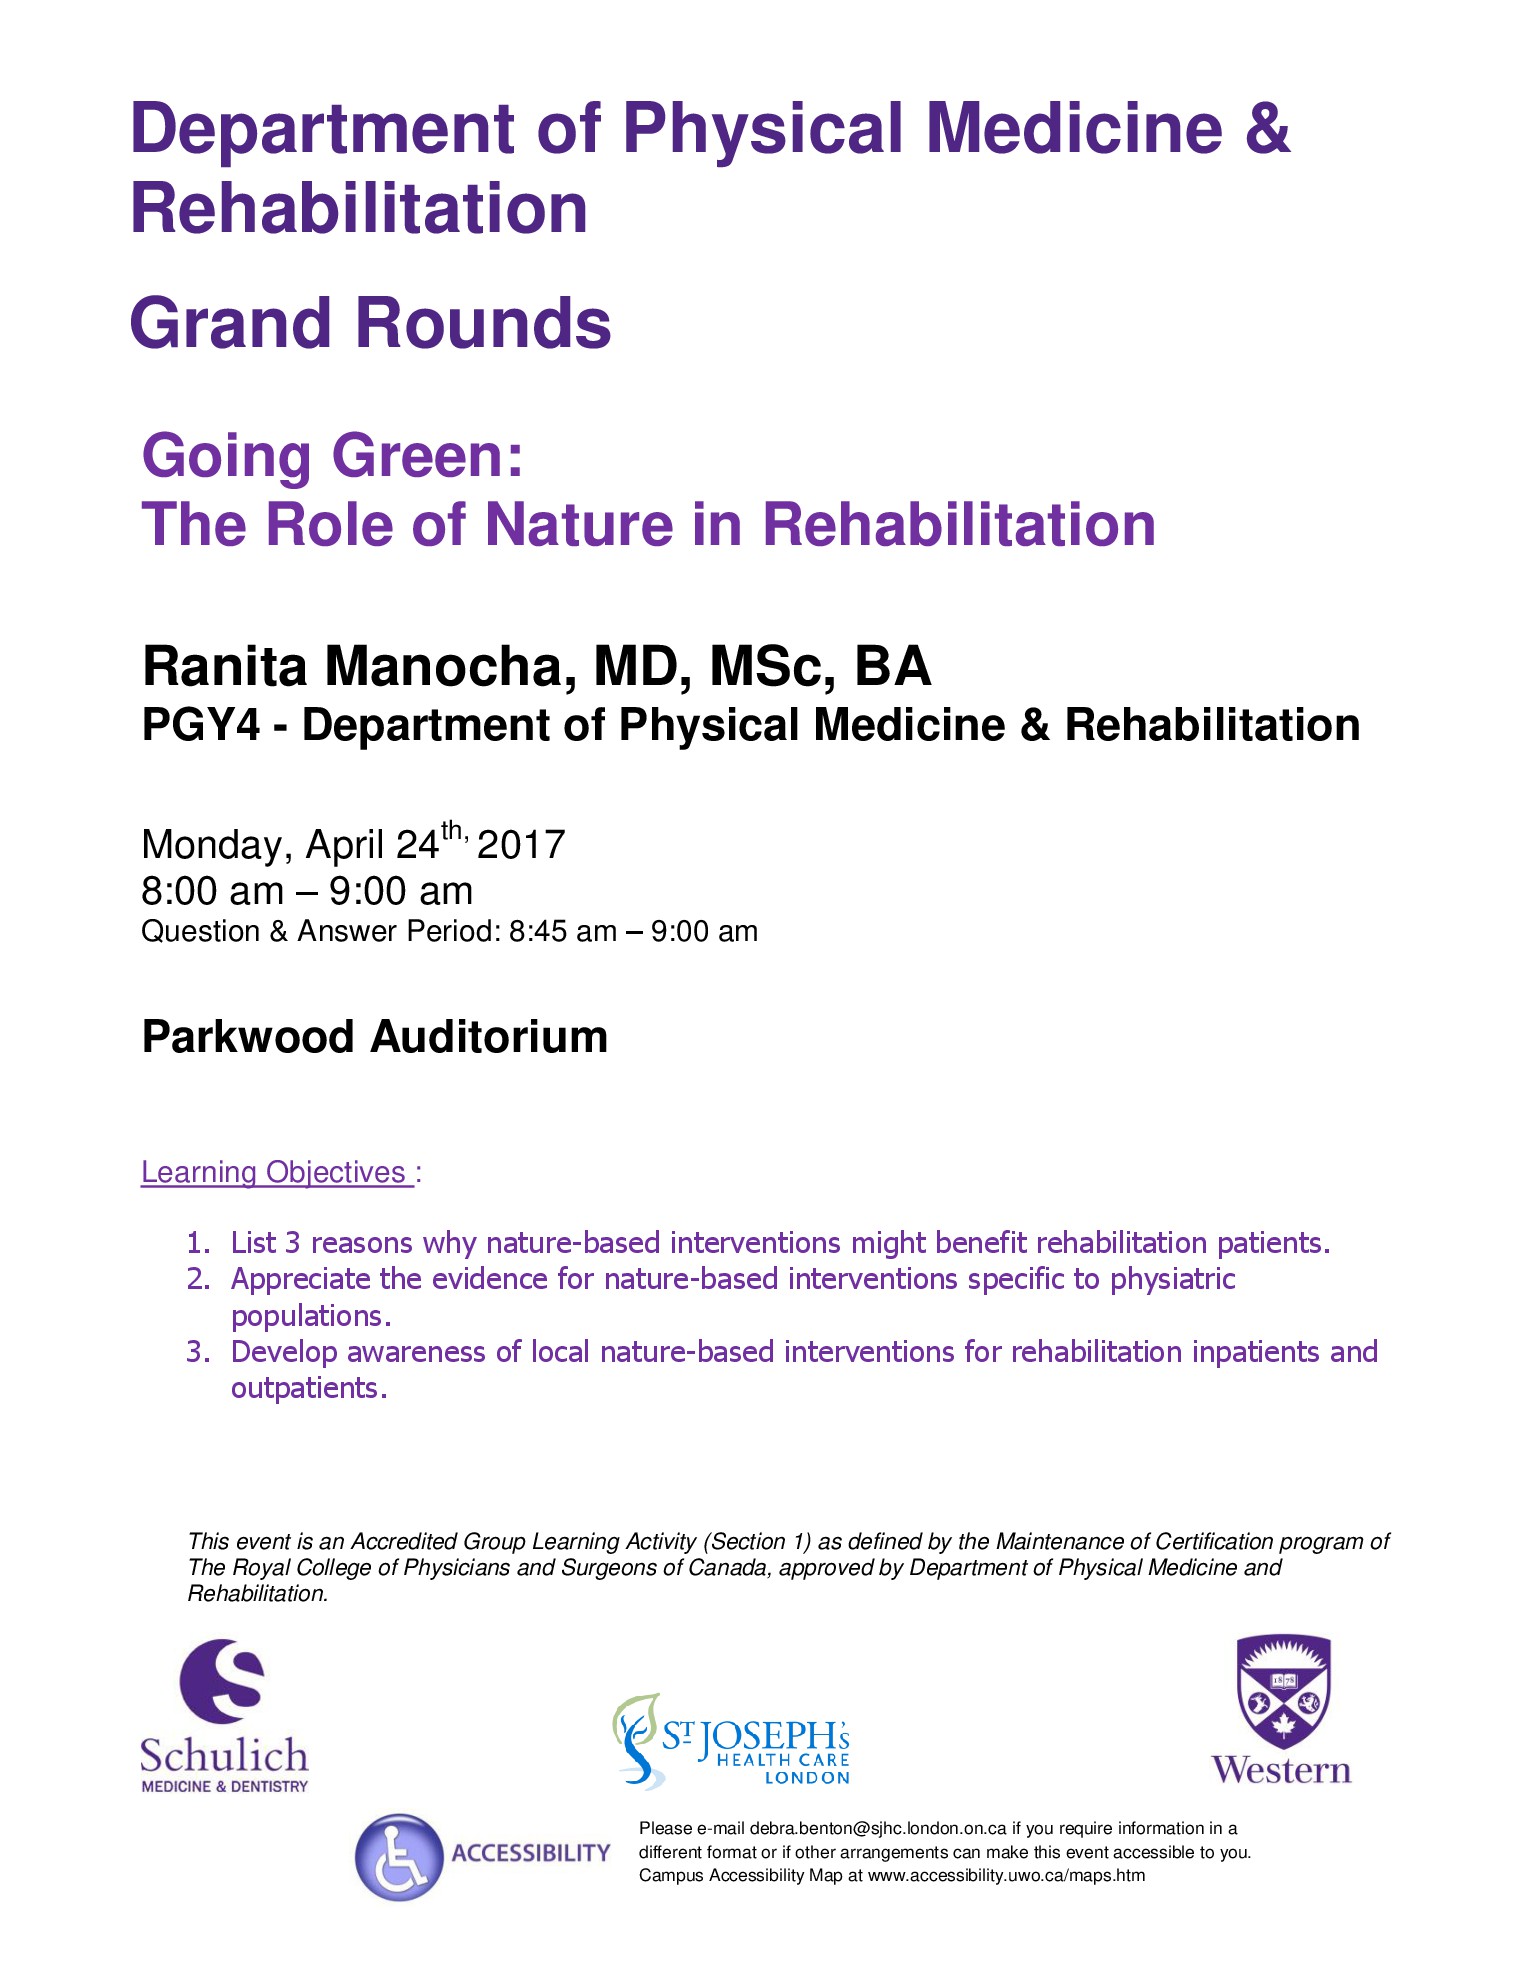 Grand Rounds Poster